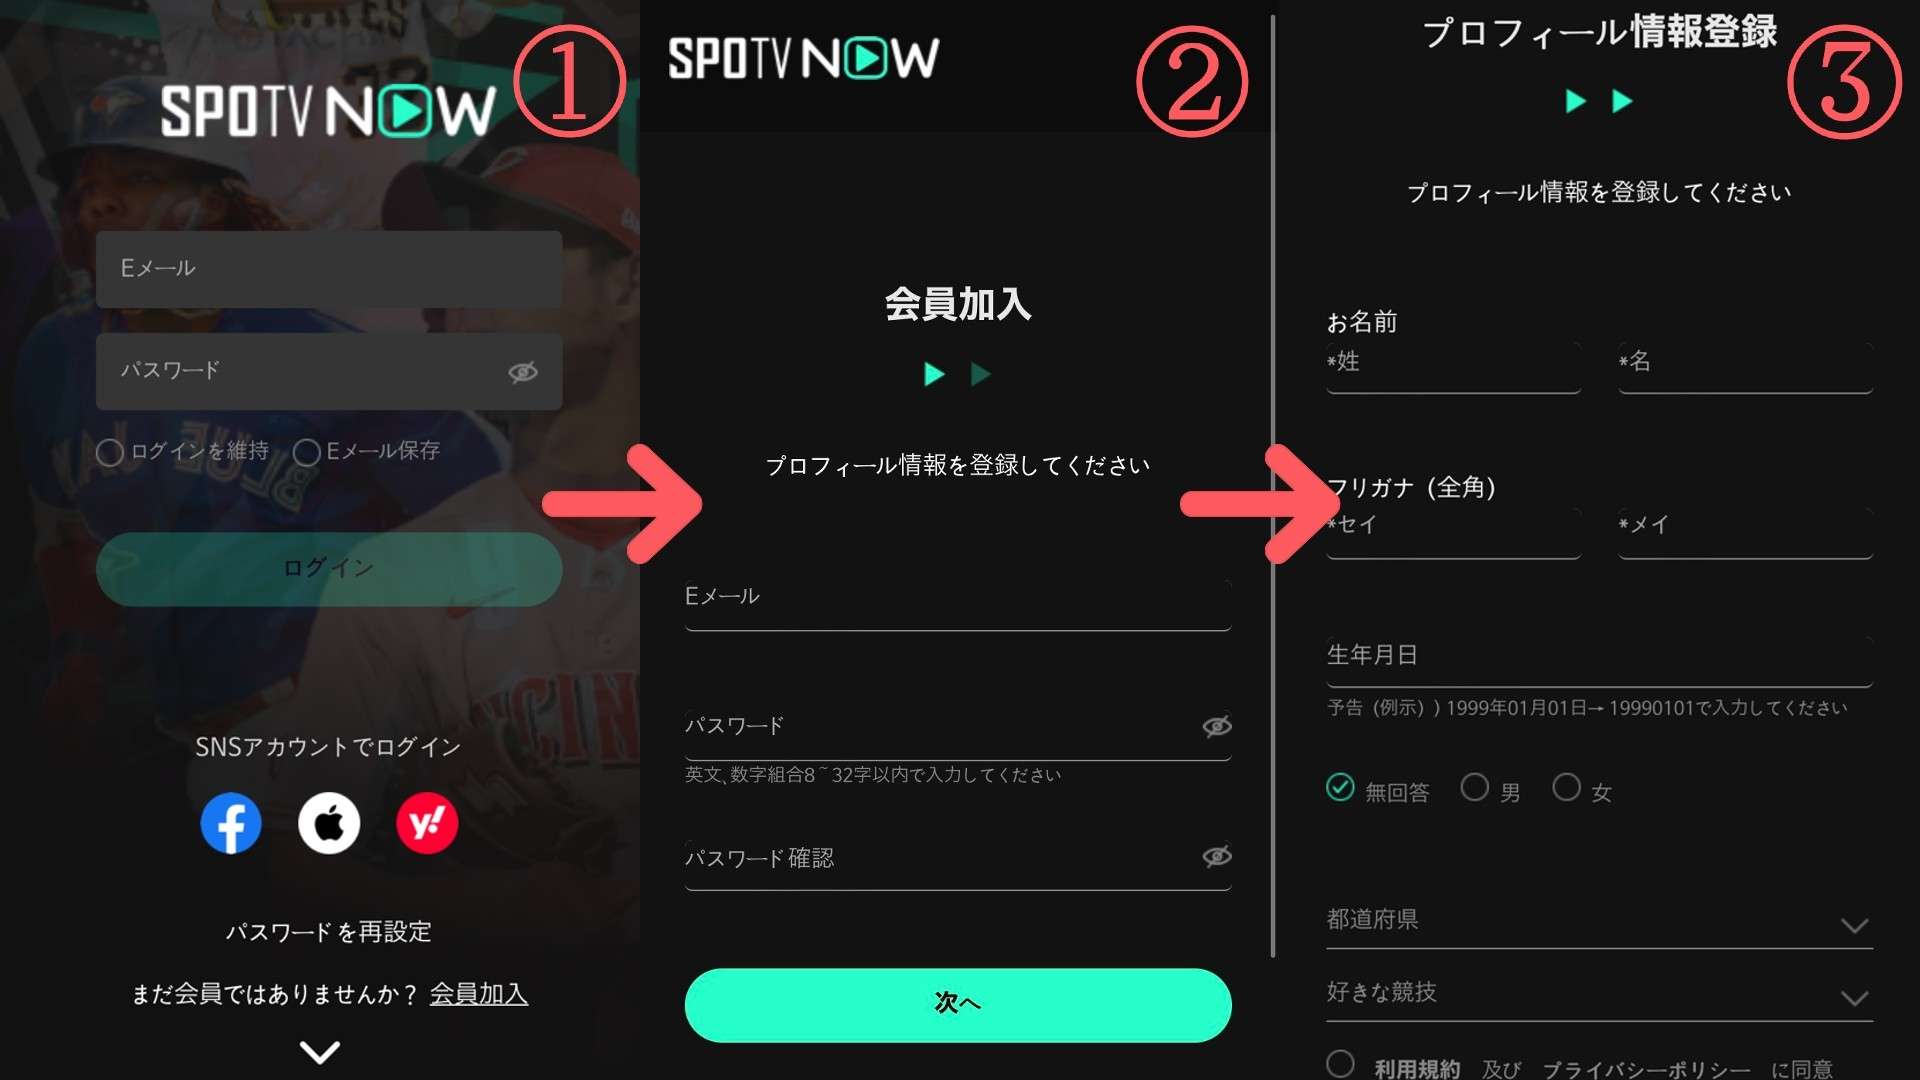 spotv now 01 join new